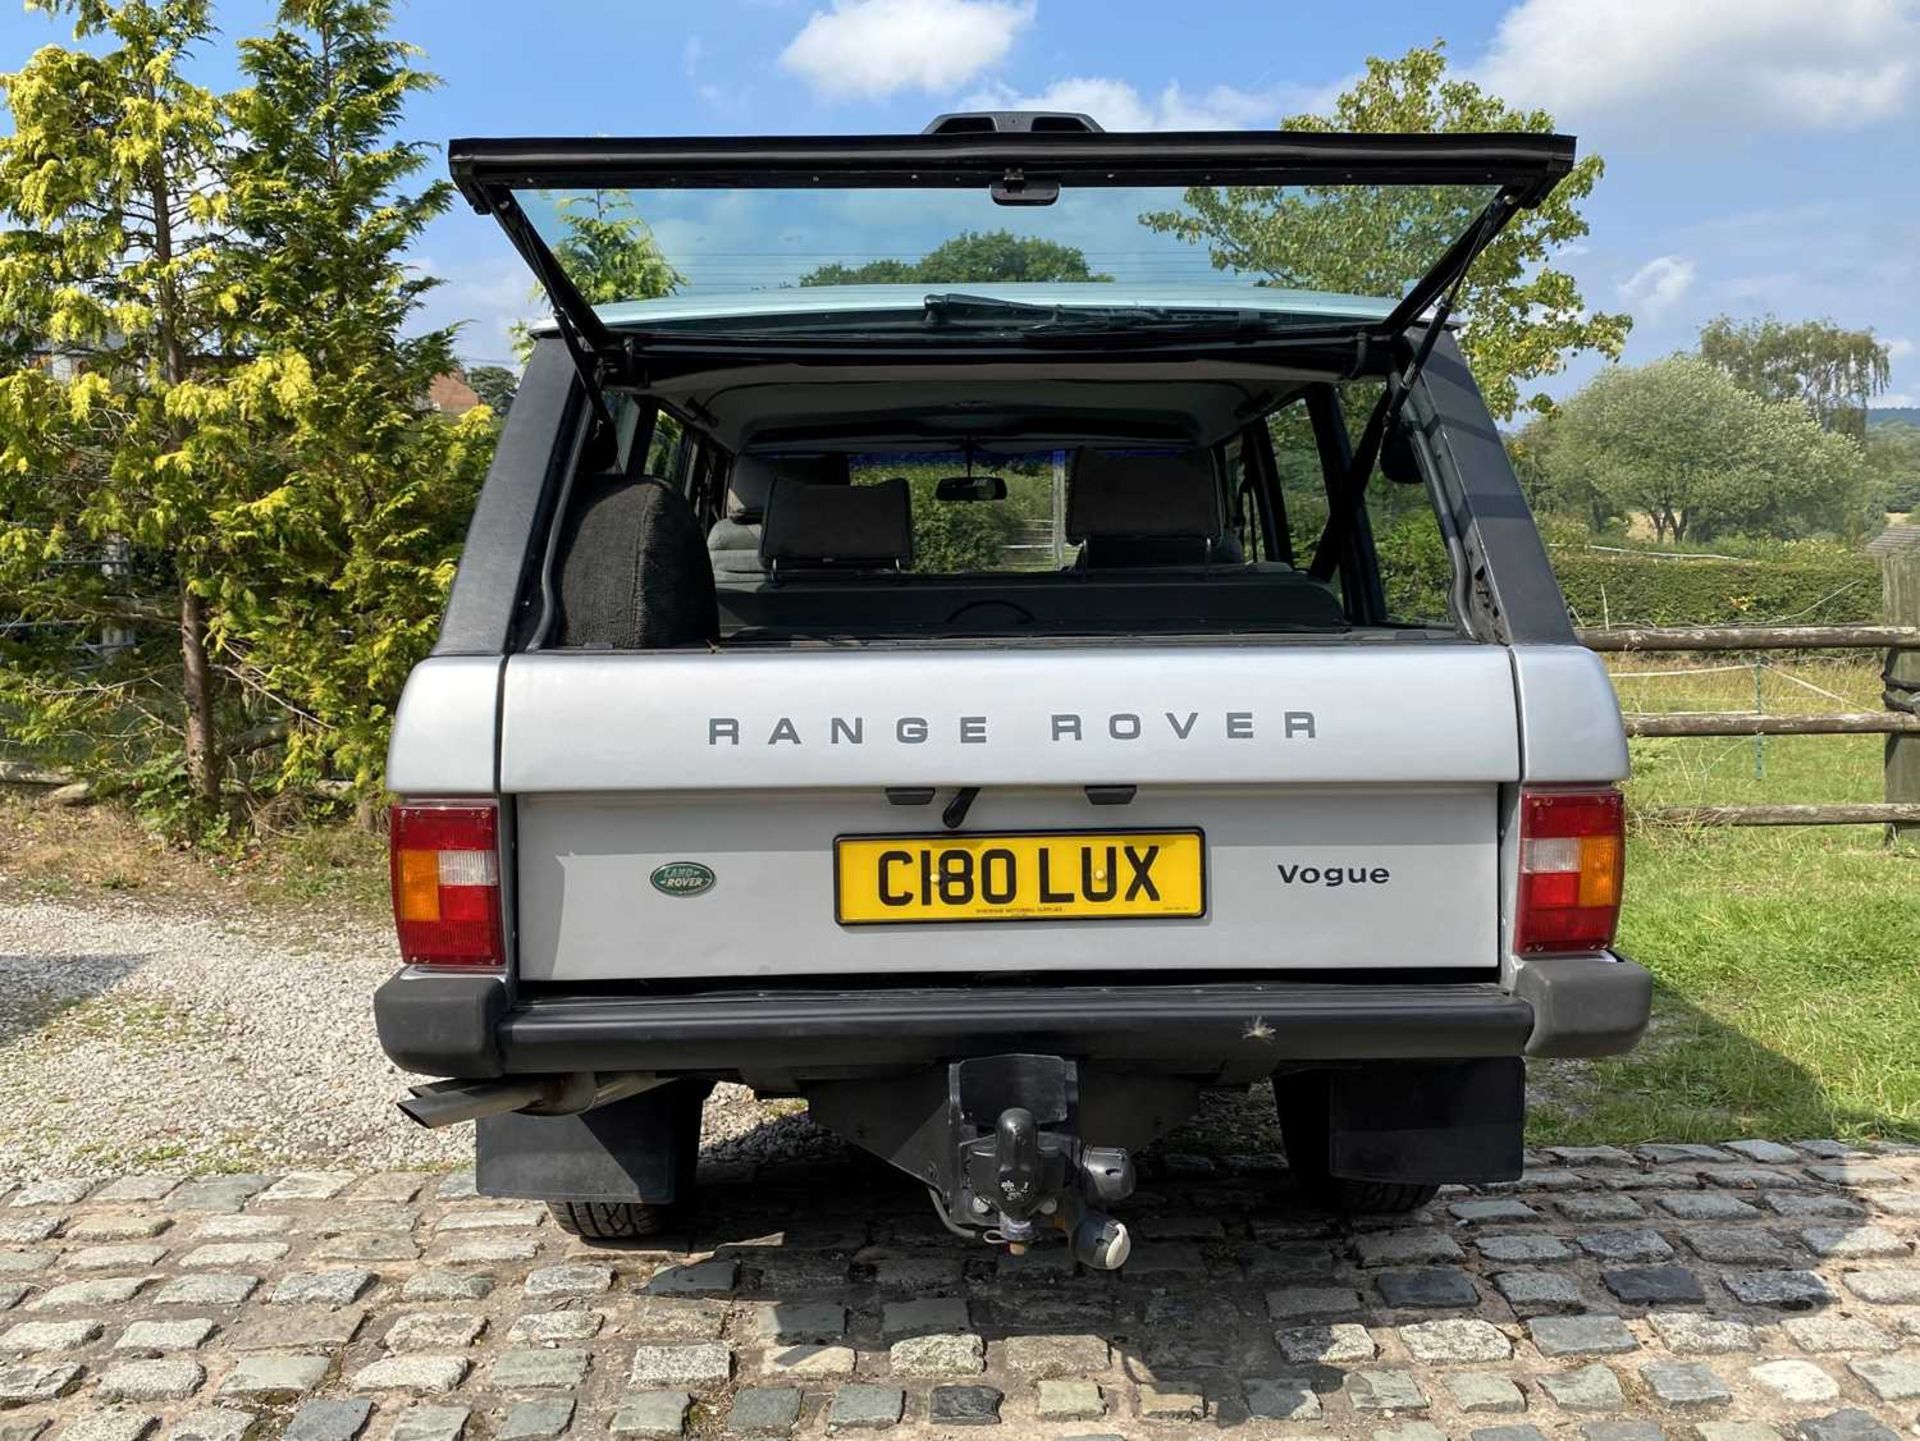 1985 Range Rover Vogue EFI Superbly presented with the benefit of a galvanised chassis - Image 18 of 46